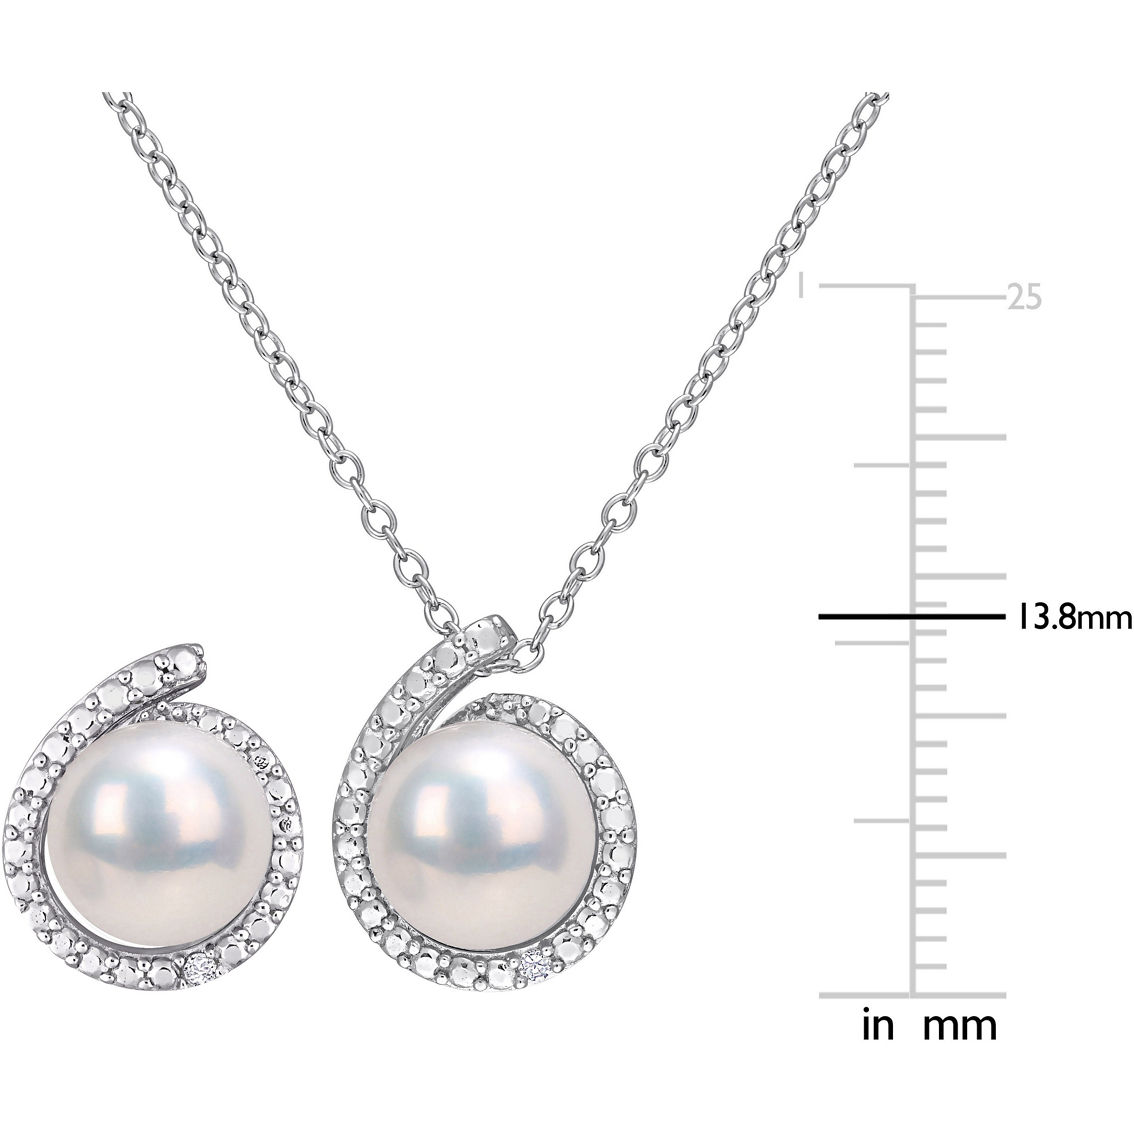 Sofia B. Cultured Freshwater Pearl Diamond Accent Earrings & Necklace 2 pc. Set - Image 3 of 3